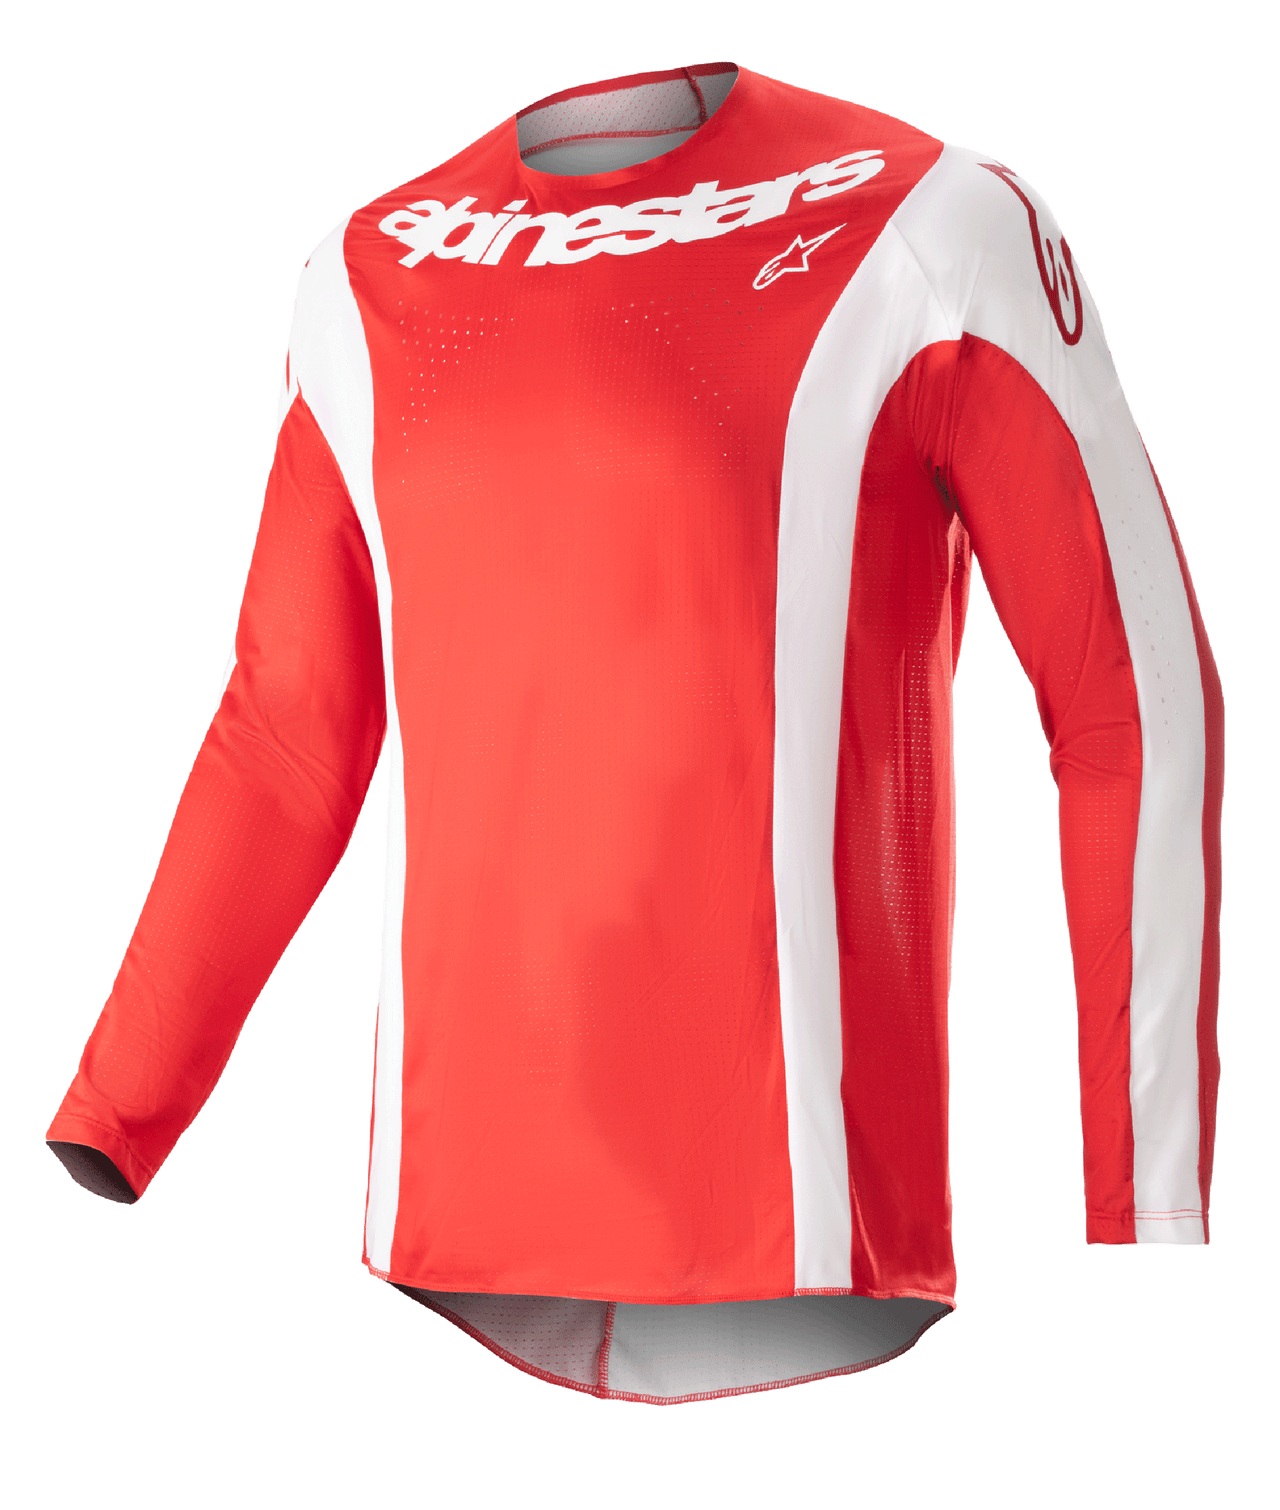 Techstar Jersey and Pant Collection